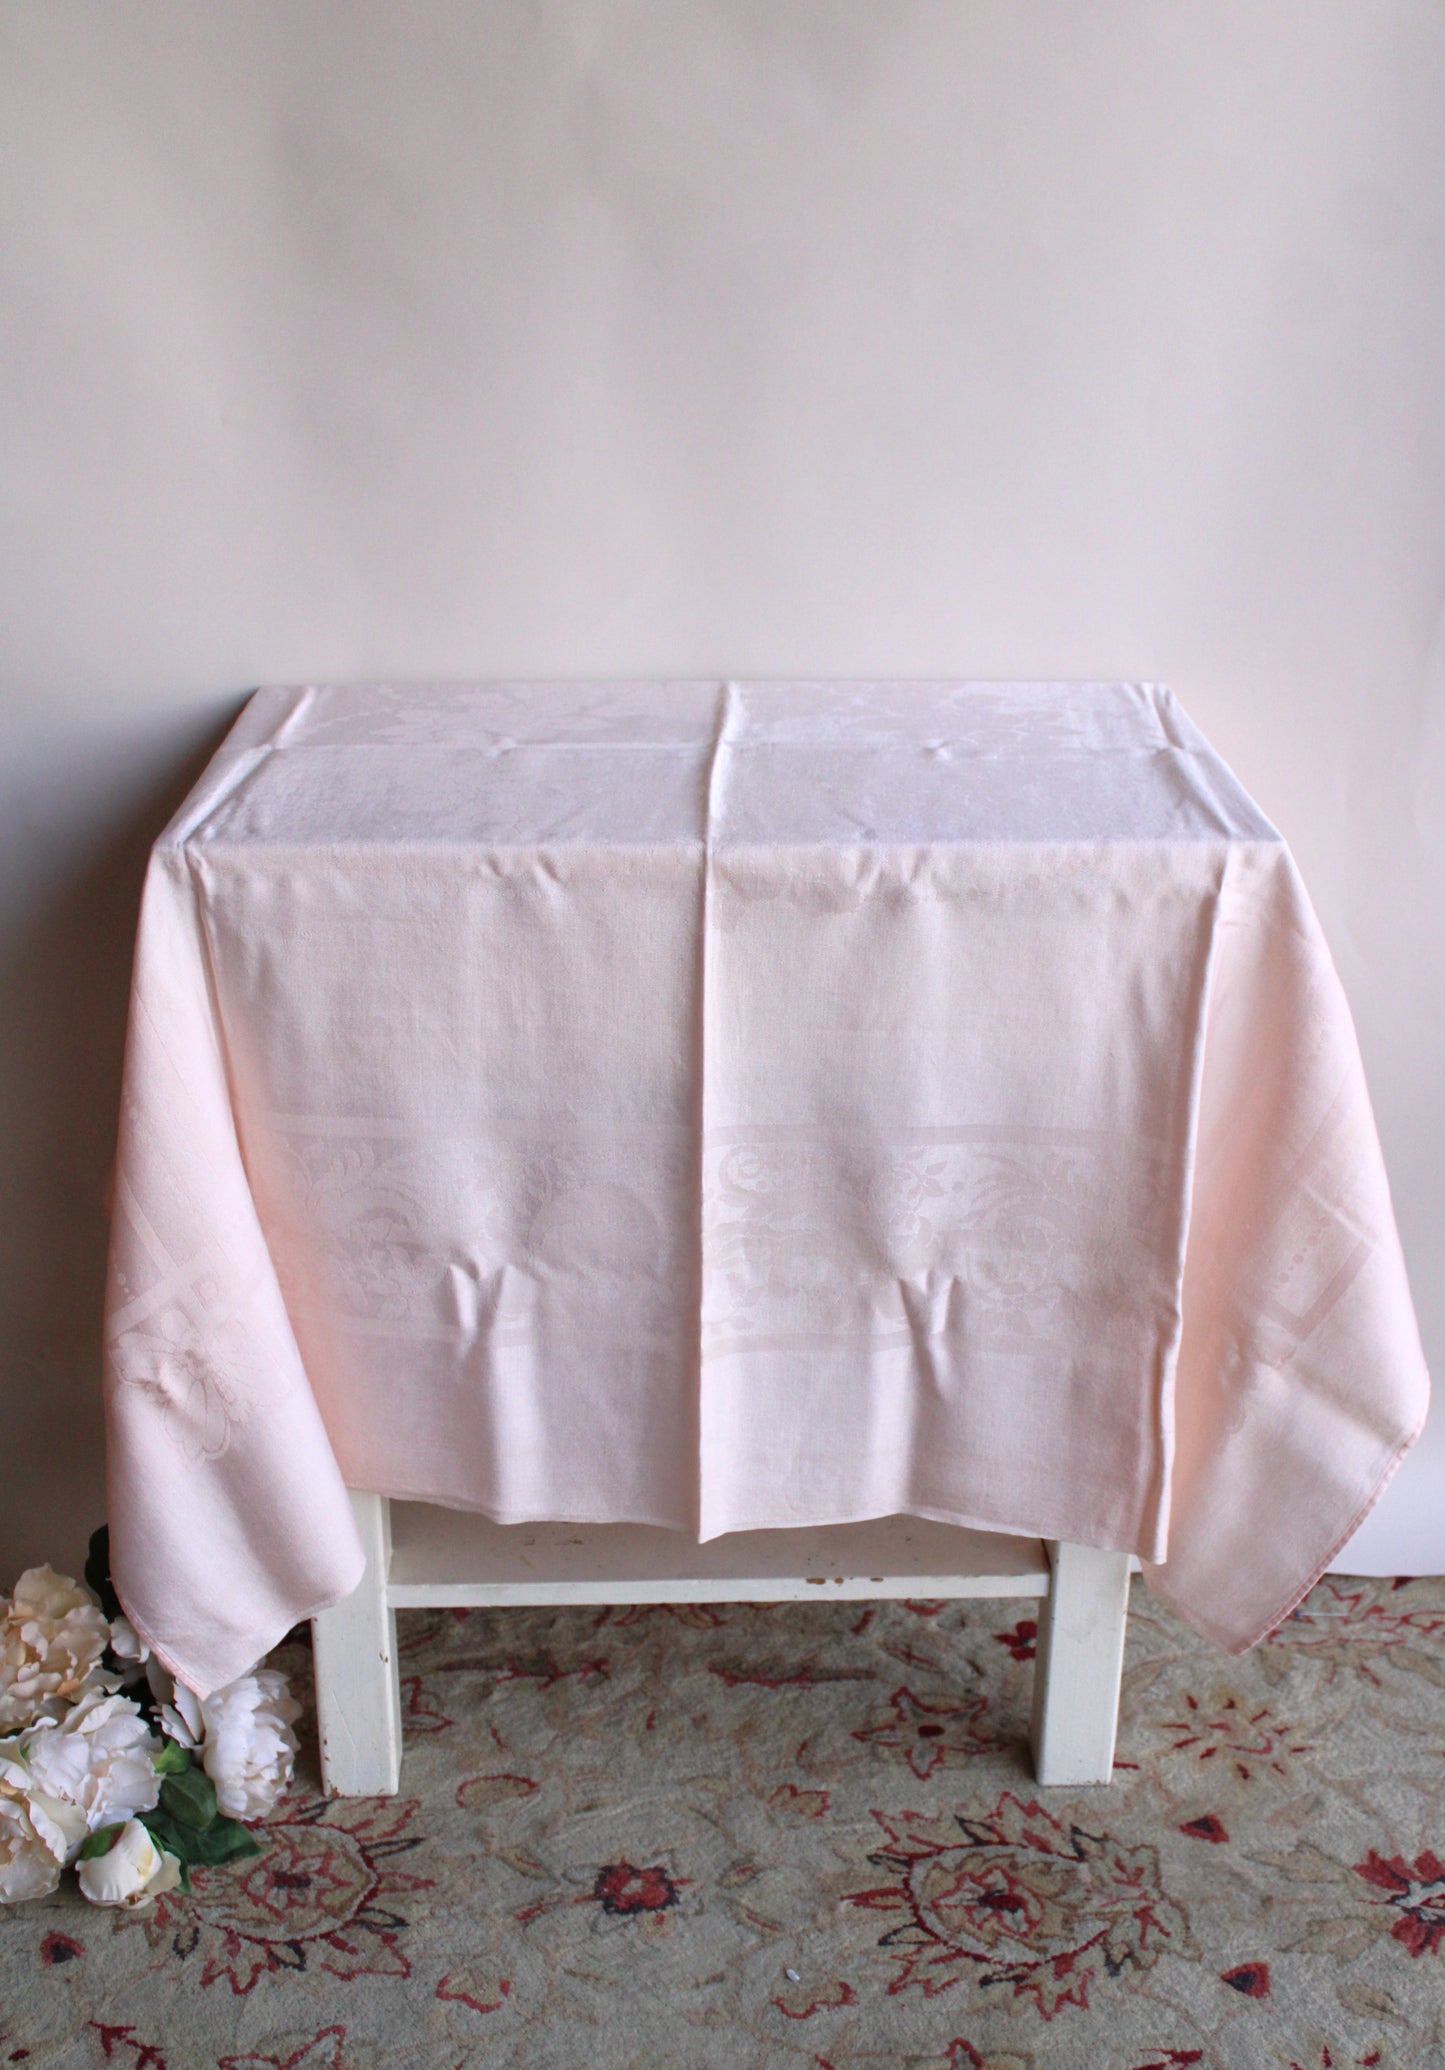 Vintage 1950s 1960s Pink Damask Tablecloth With Floral Pattern